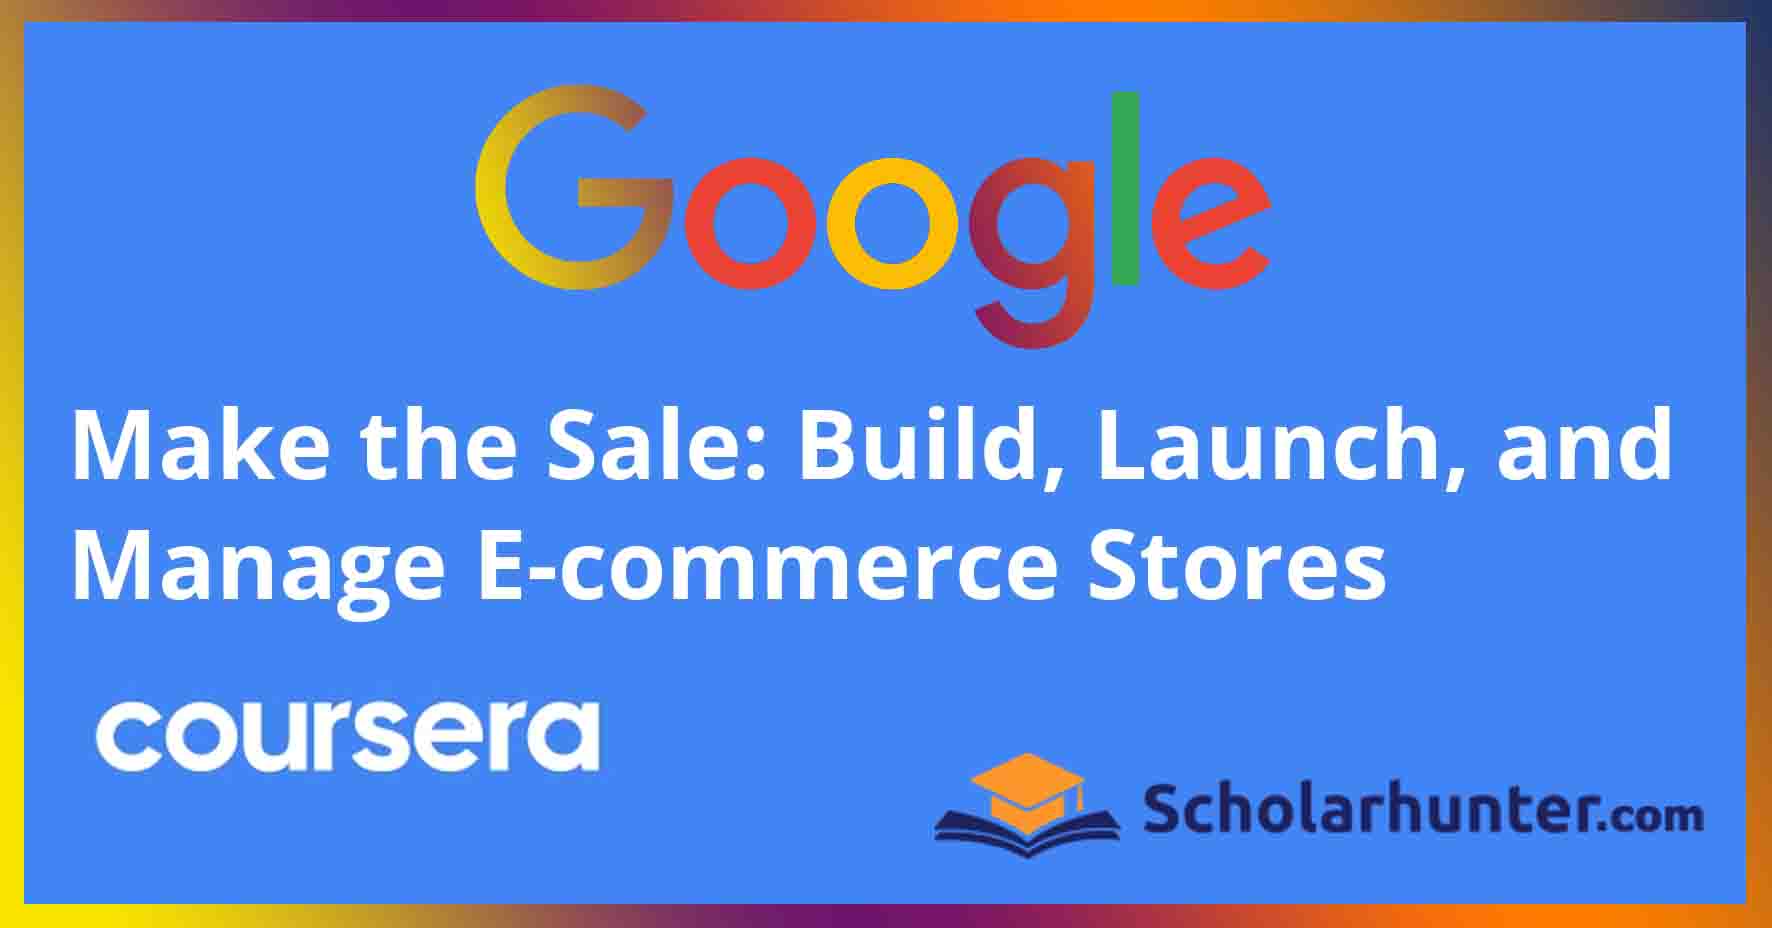 Make The Sale: Build, Launch And Manage E-Commerce Stores - Professional Certificate